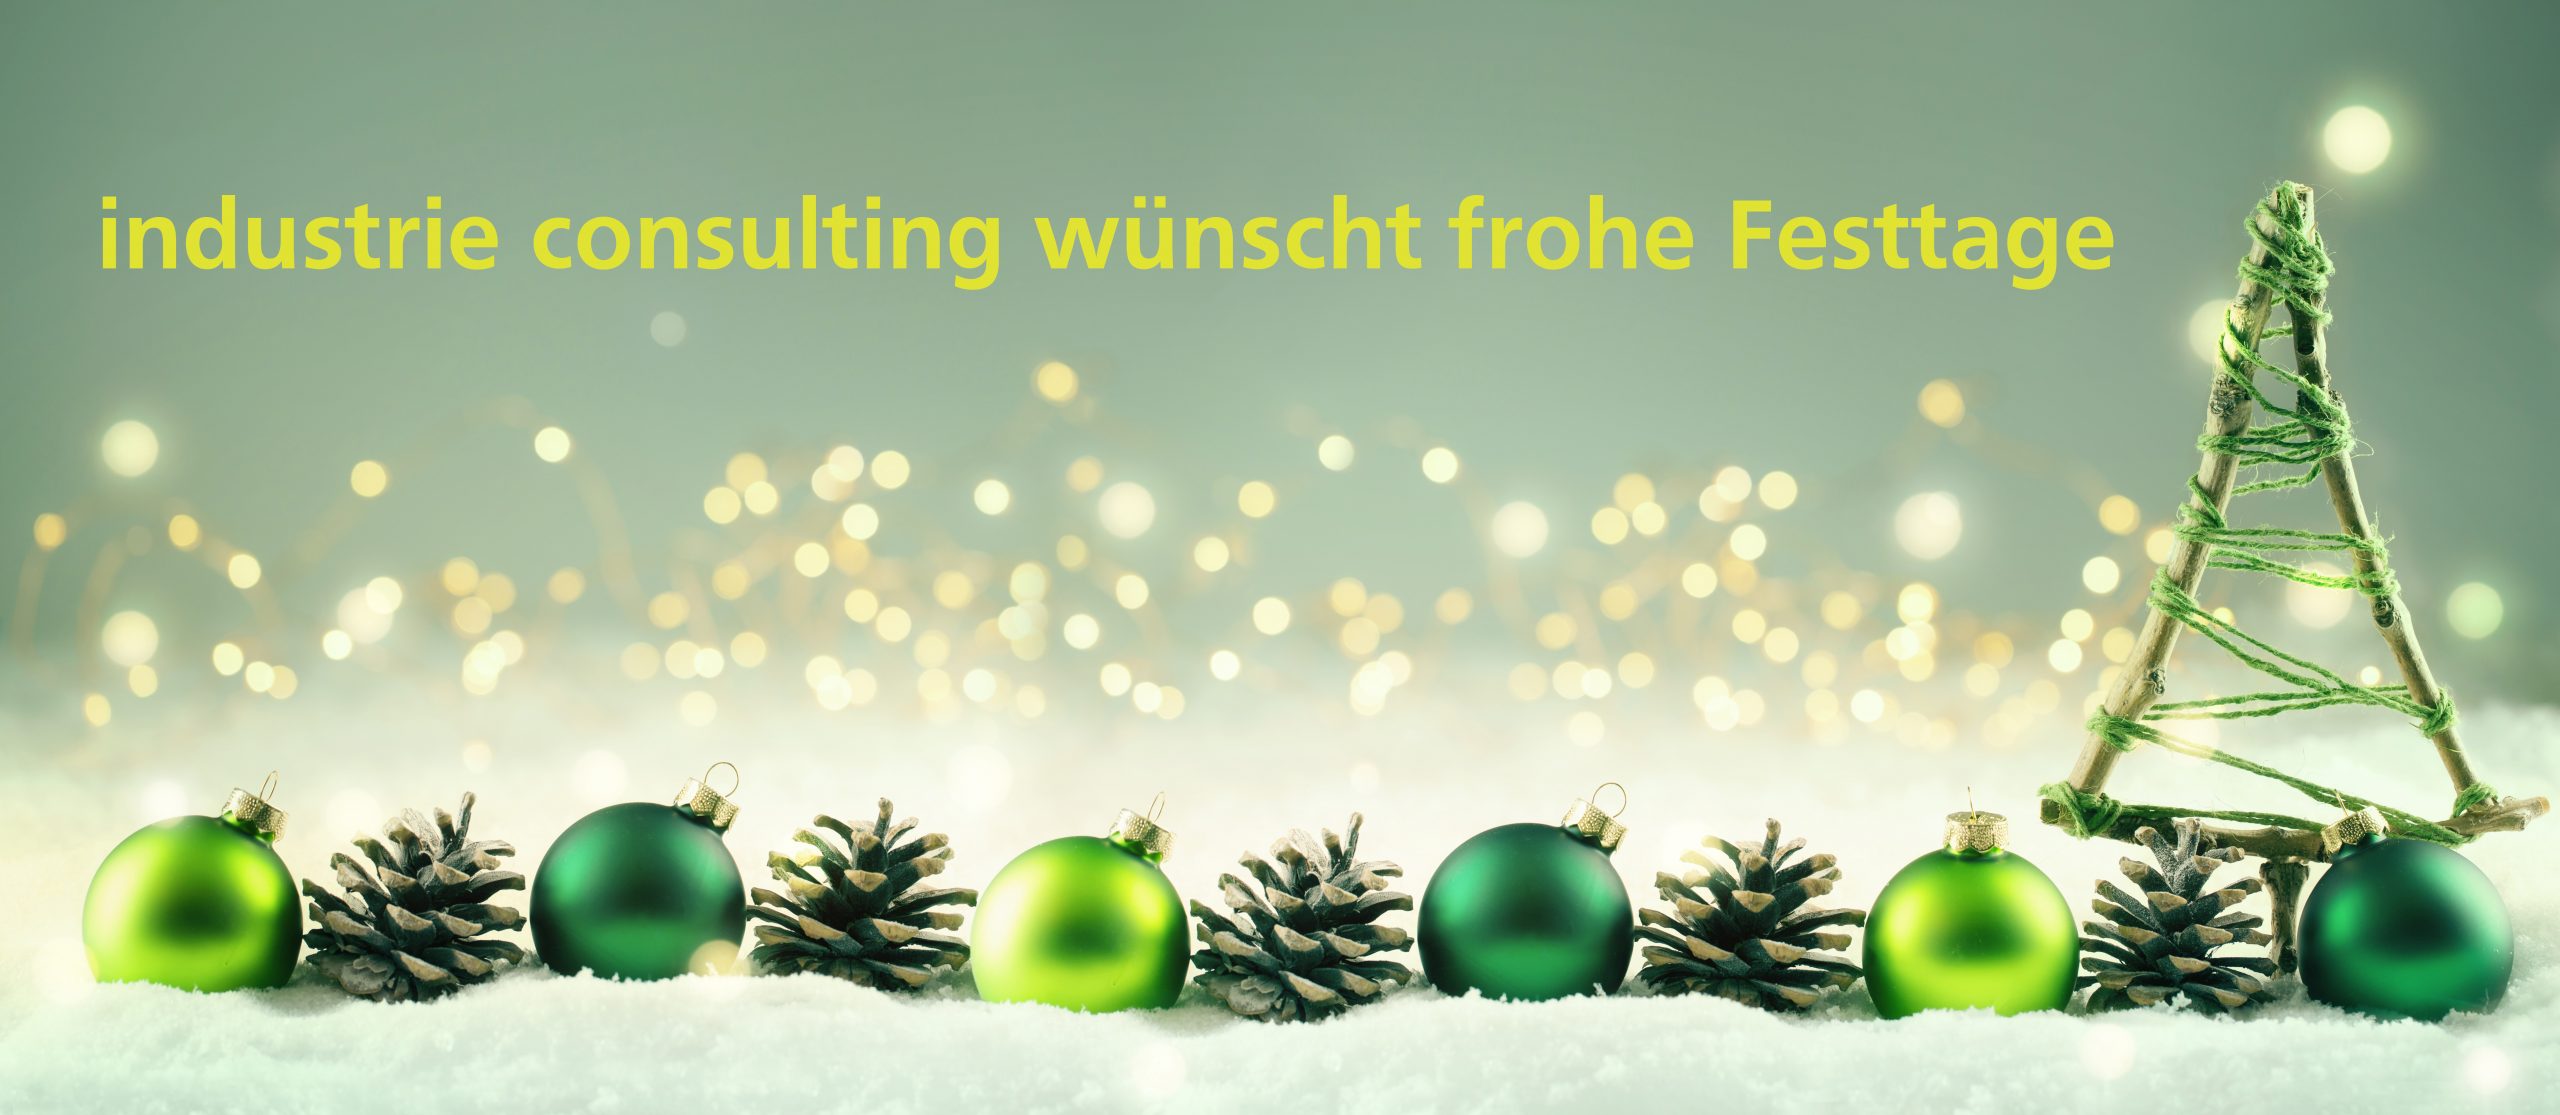 Frohe_Festtage